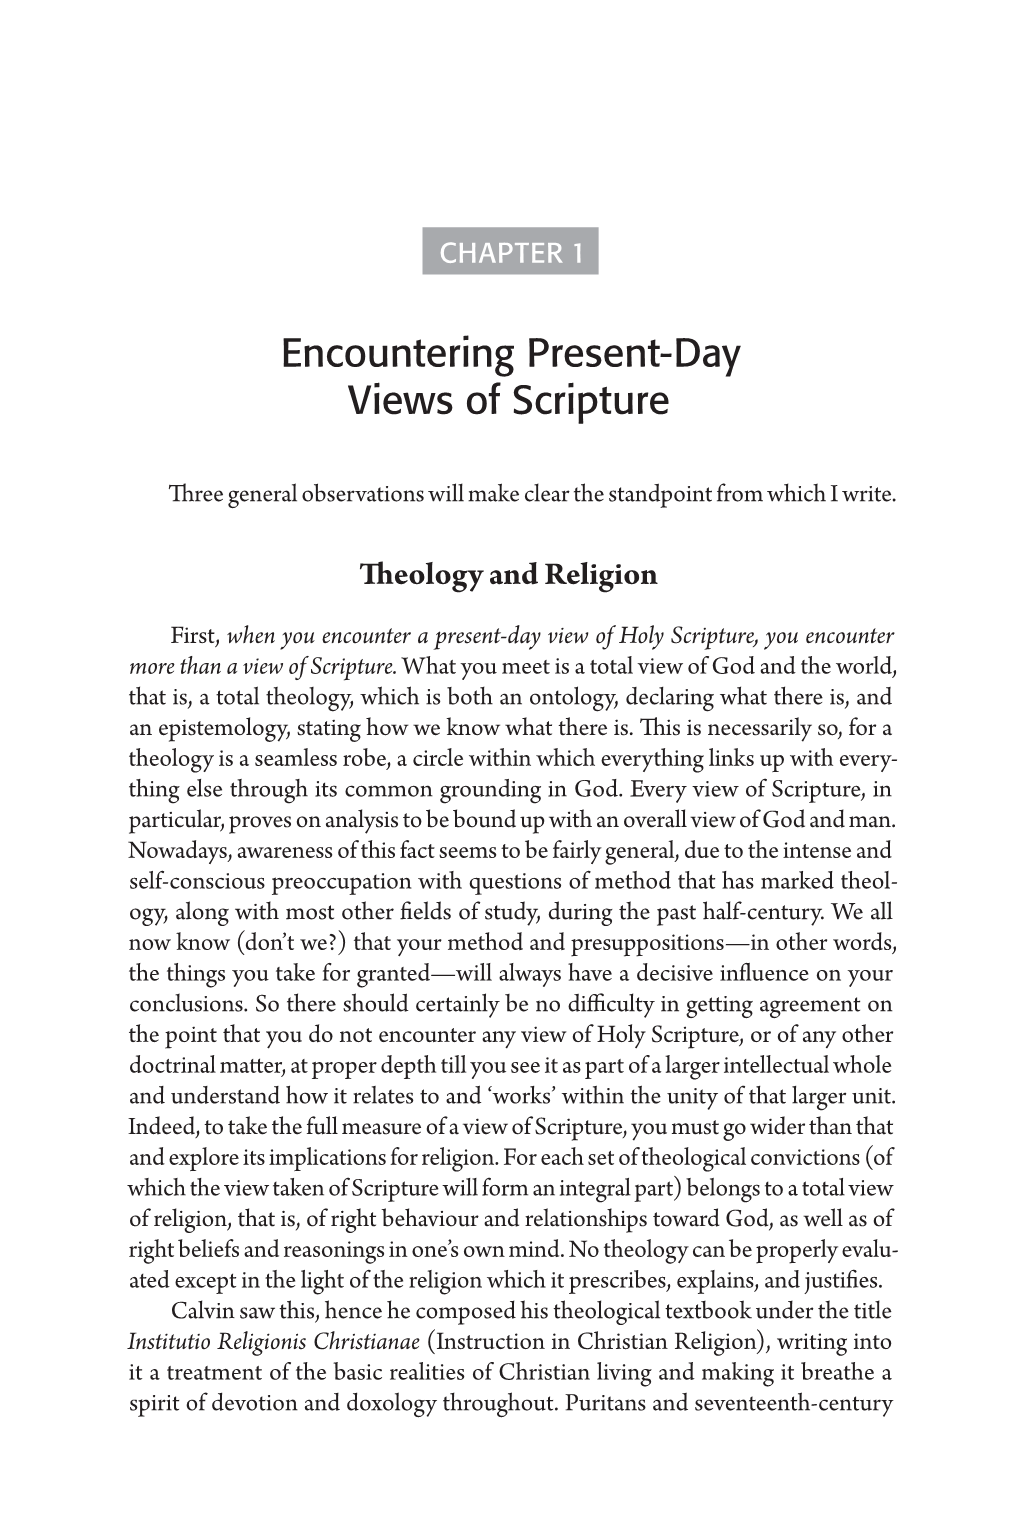 Encountering Present-Day Views of Scripture